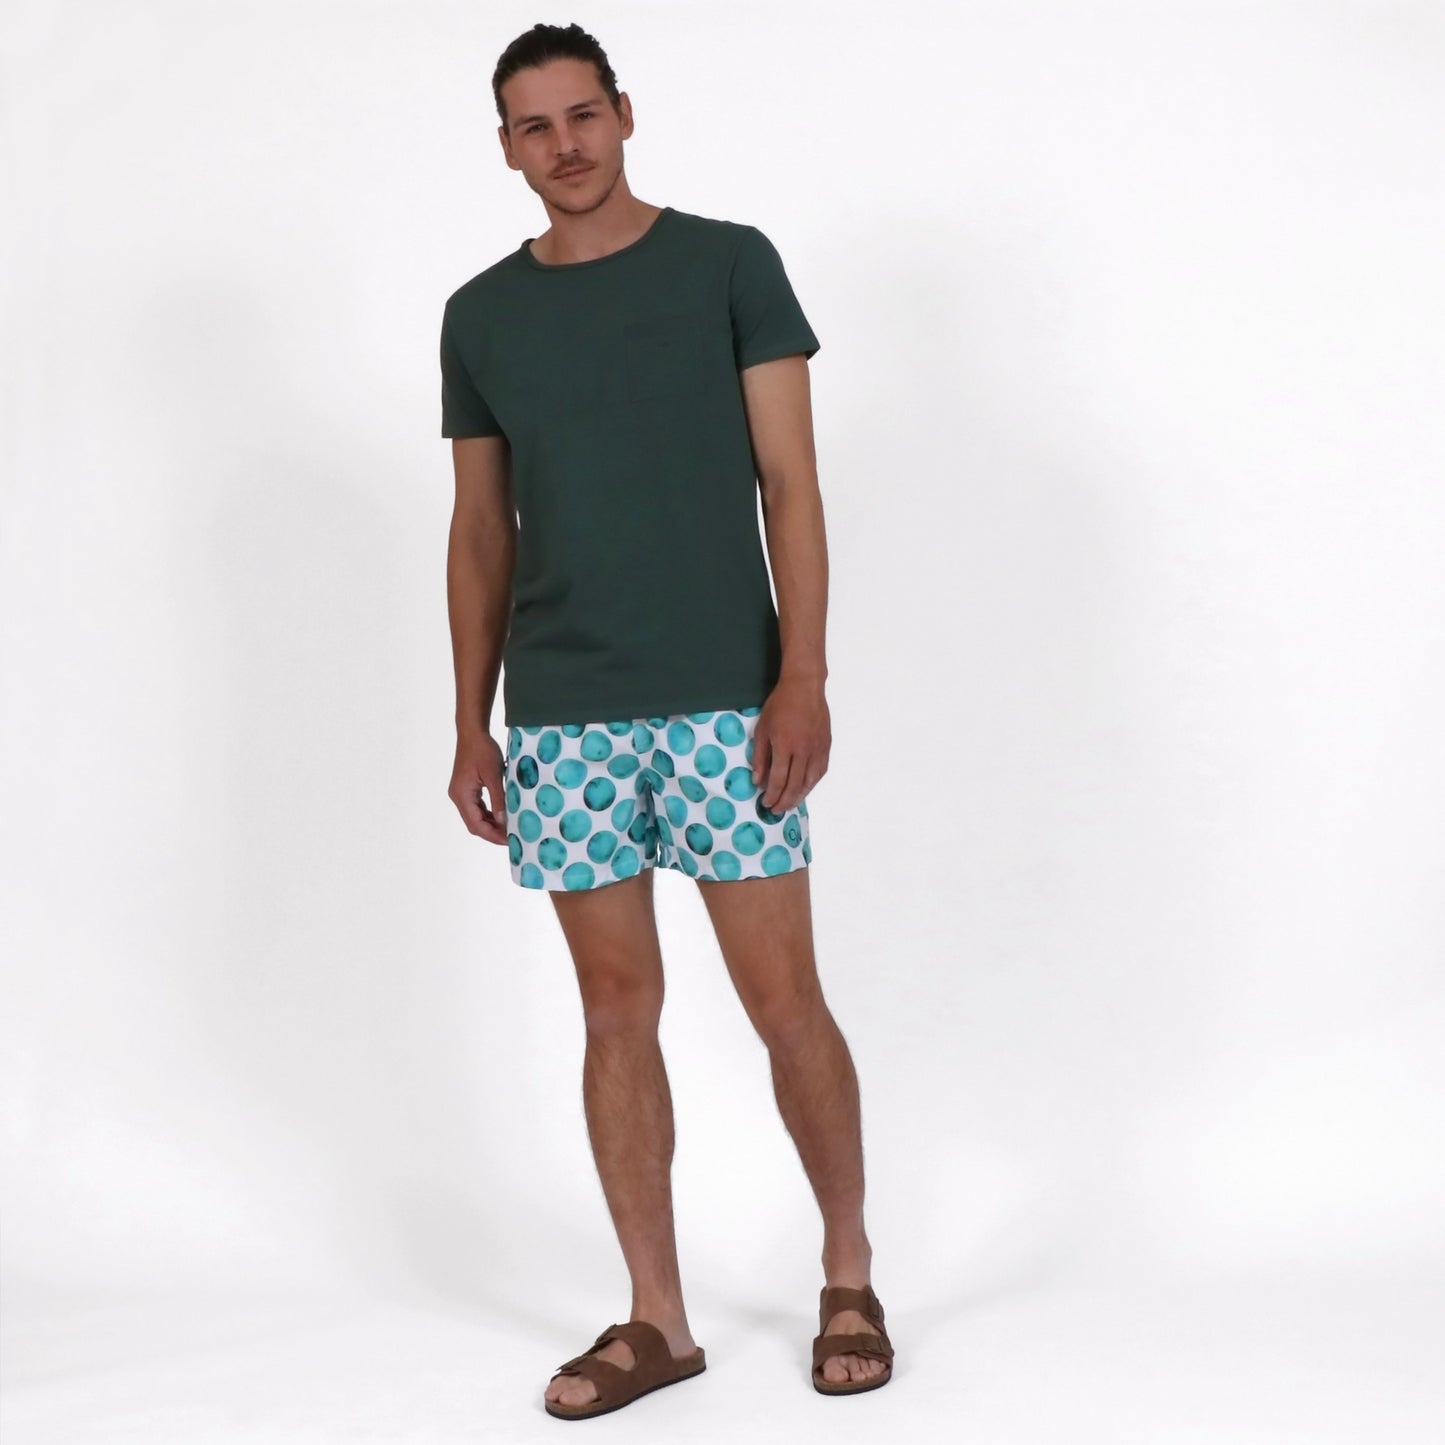 OWSS2204 OCEAN SPOT PRINT SWIM SHORT RECYCLED POLYESTER STYLED WITH FOREST GREEN ORGANIC COTTON POCKET T-SHIRT